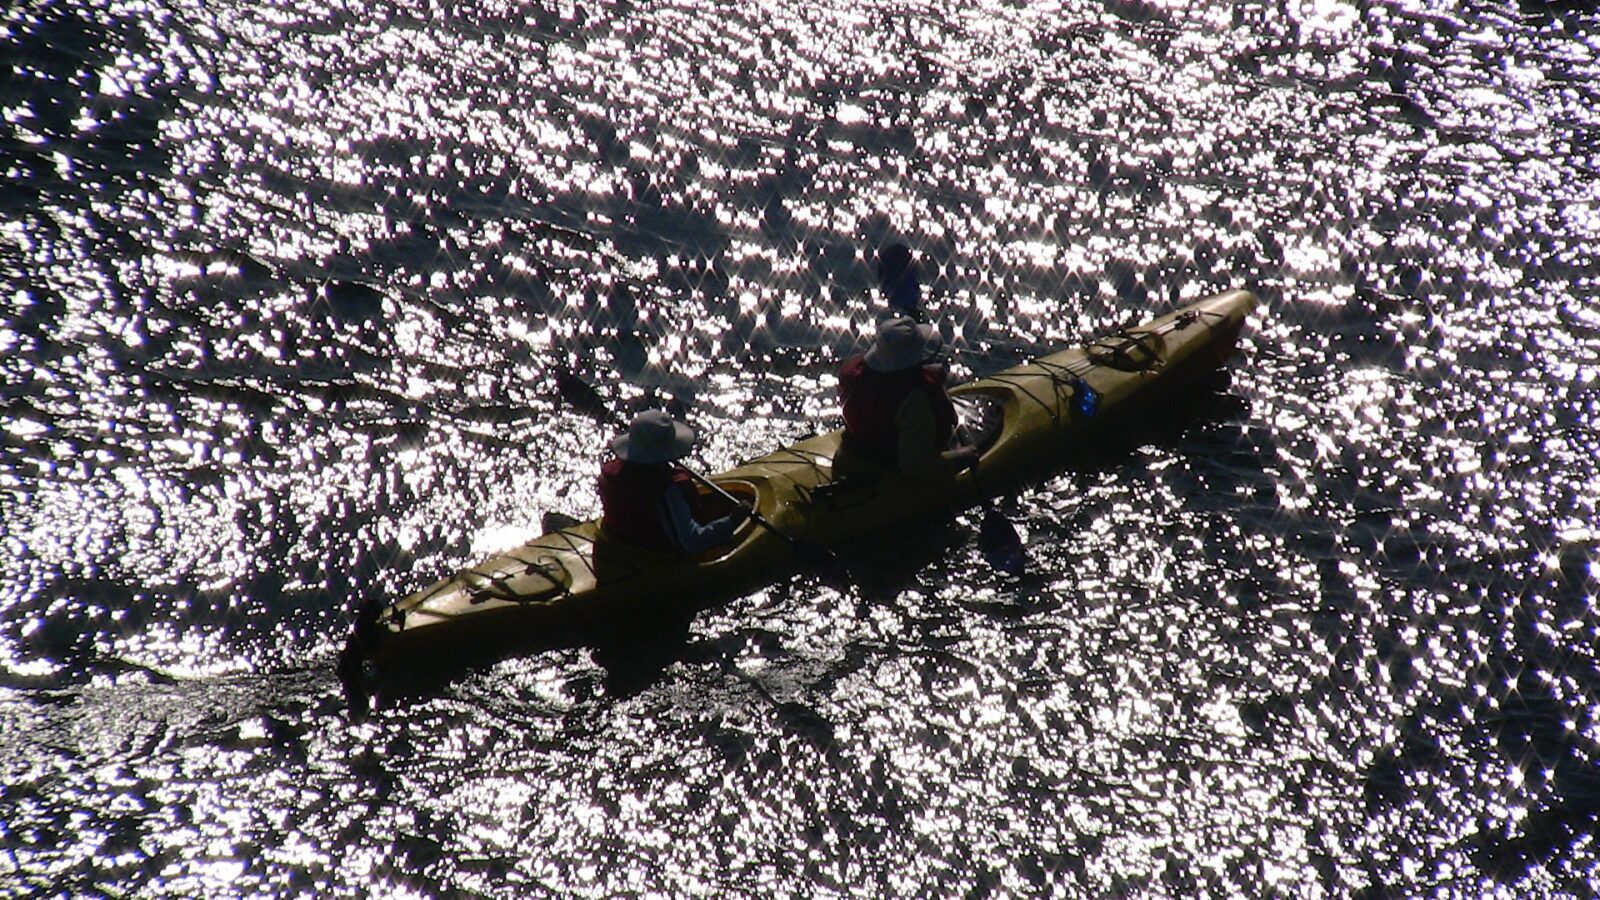 Two people in a yellow canoe.